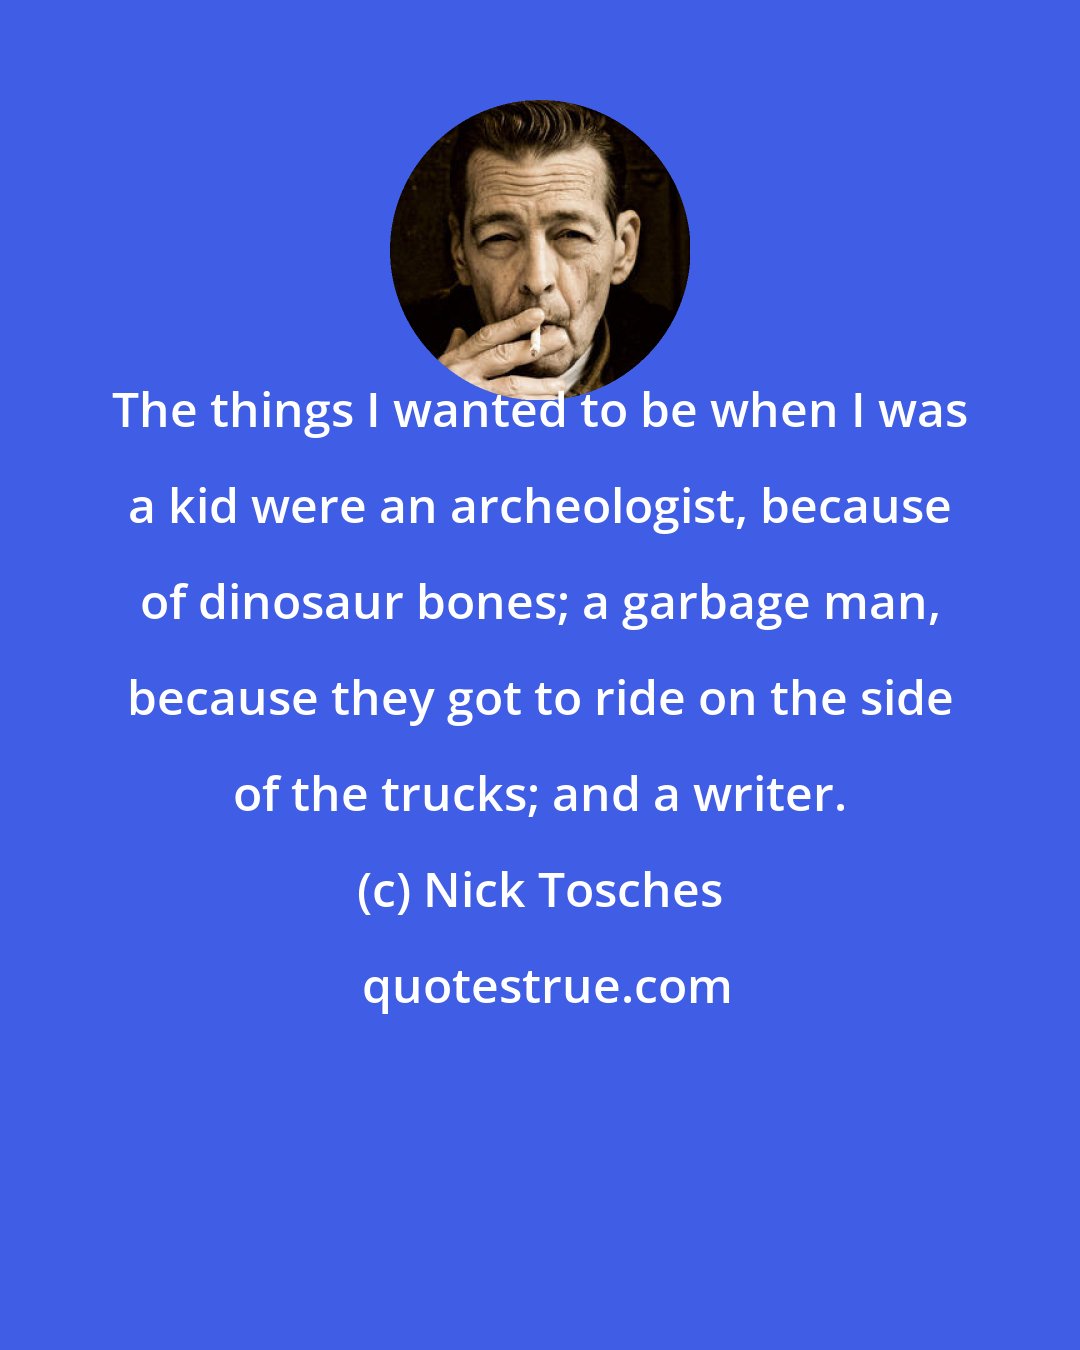 Nick Tosches: The things I wanted to be when I was a kid were an archeologist, because of dinosaur bones; a garbage man, because they got to ride on the side of the trucks; and a writer.